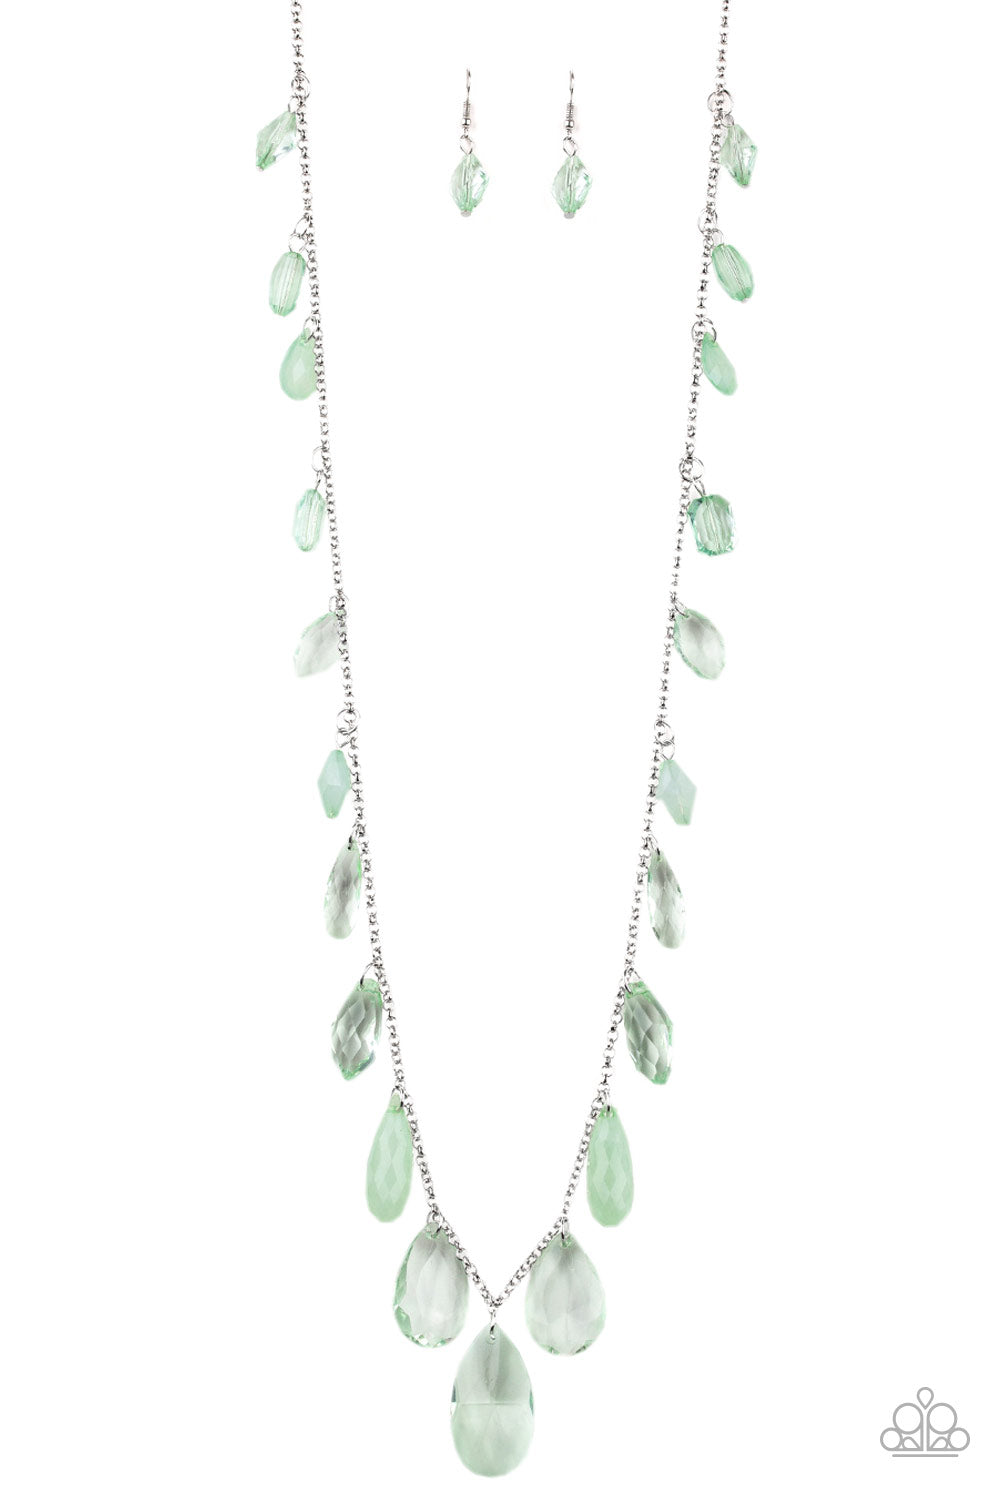 GLOW And Steady Wins The Race Green Necklace